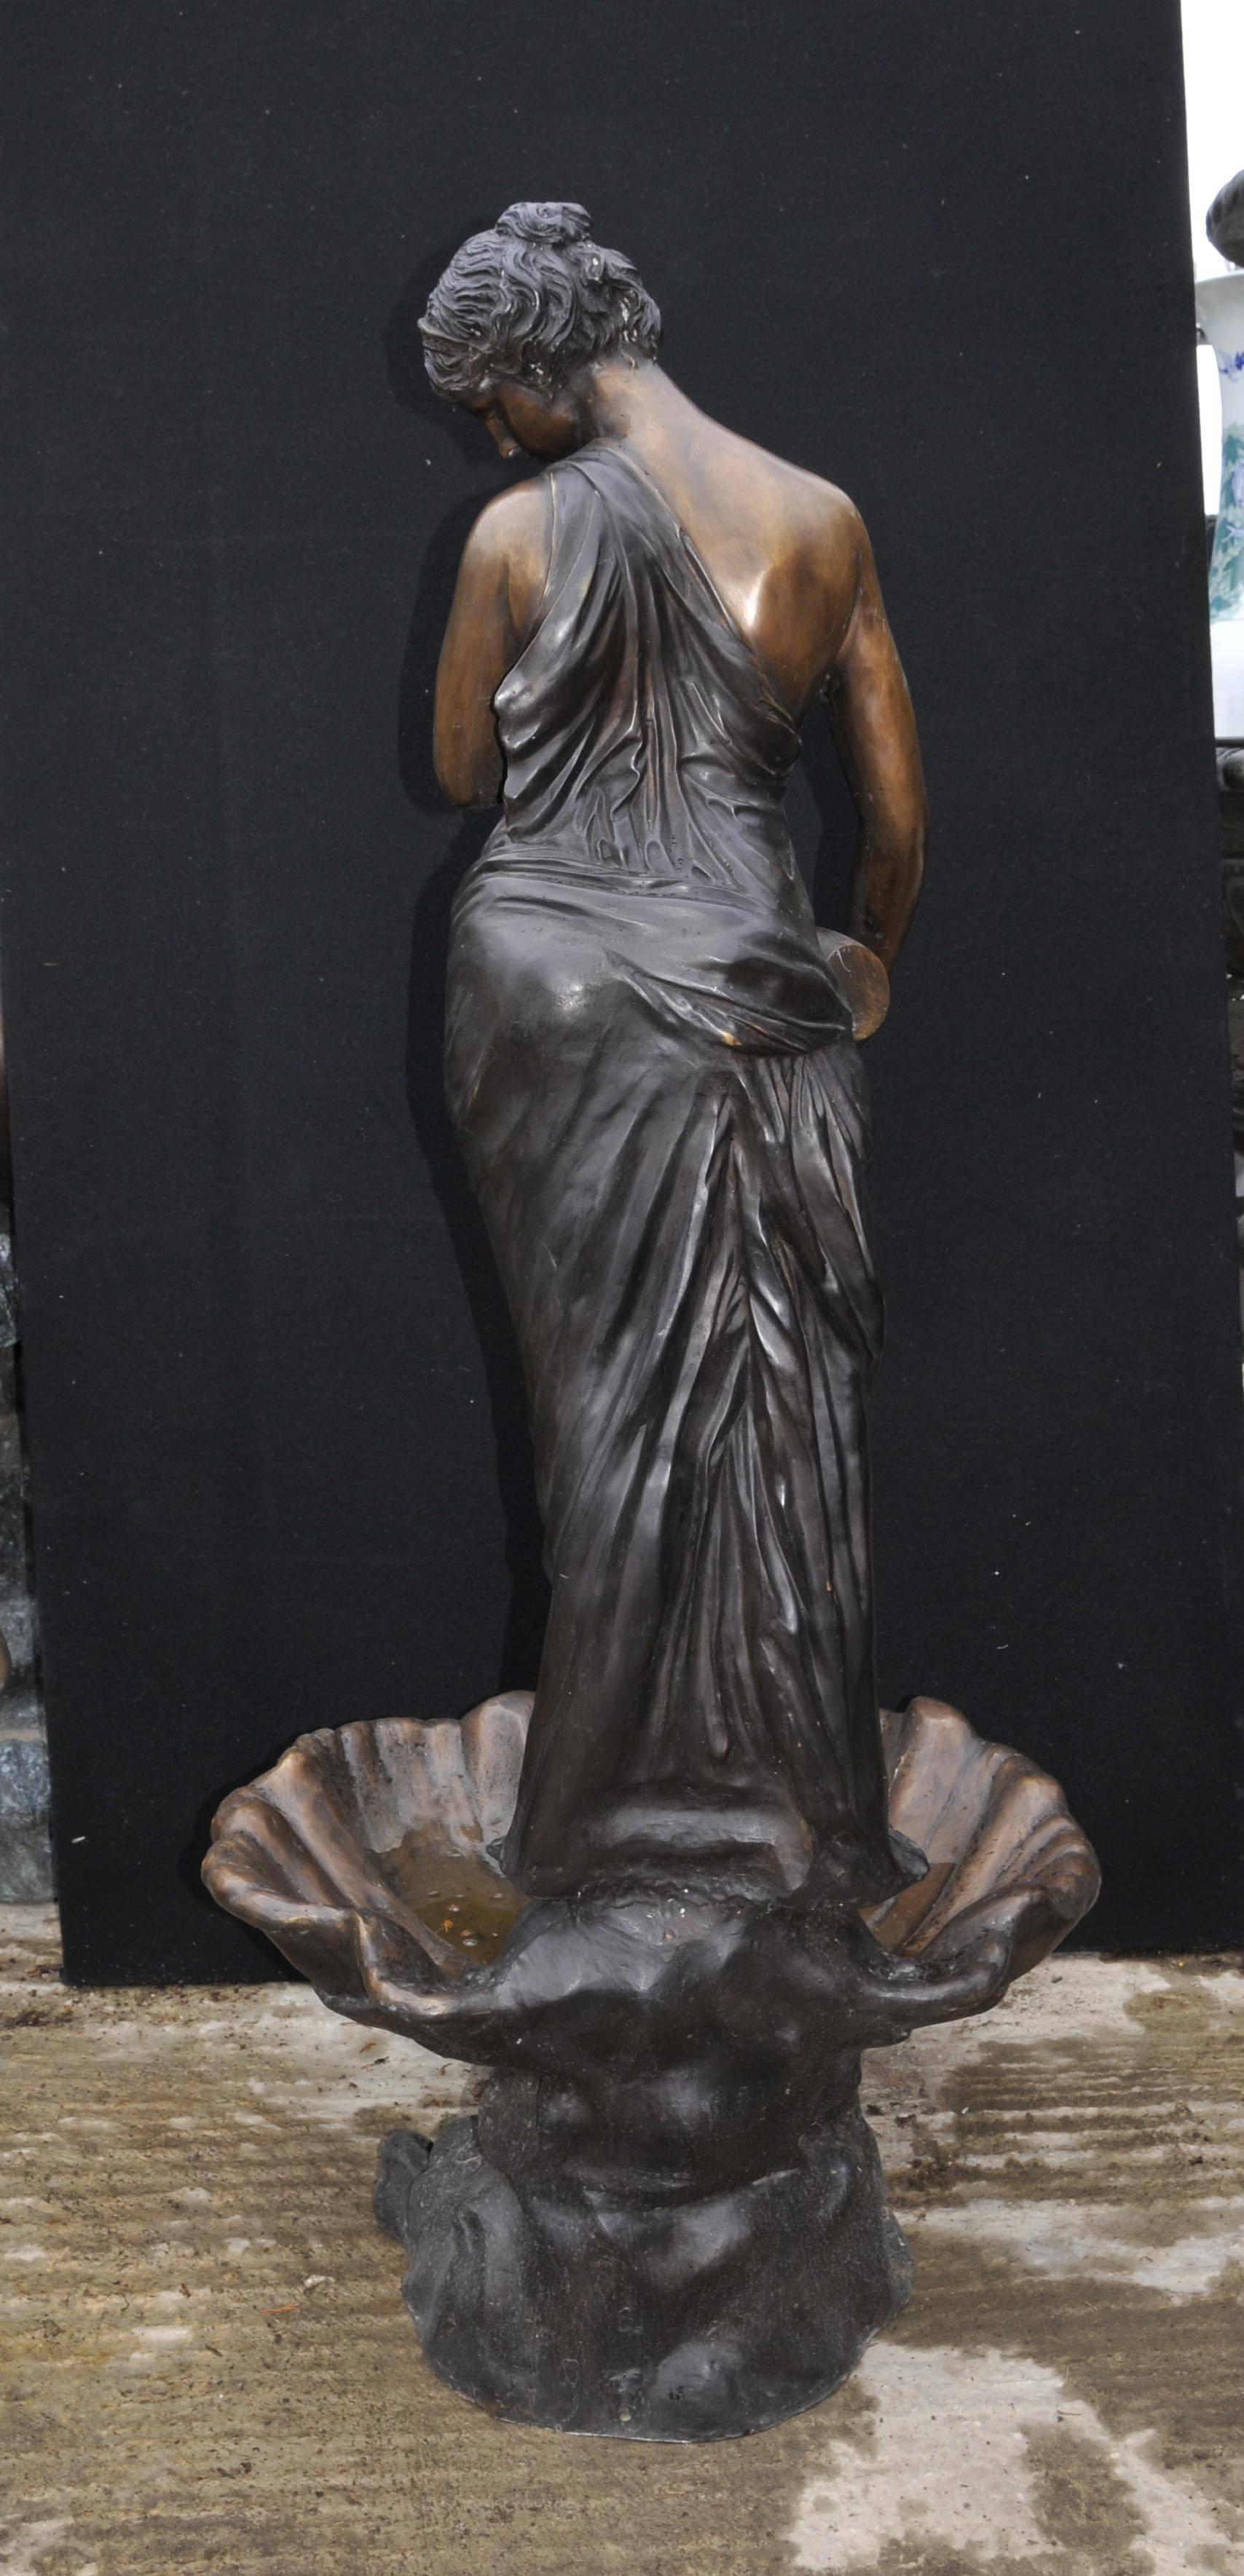 Italian Bronze Extra Large Maiden Fountain Statue Amphora Water Feature In Excellent Condition For Sale In Potters Bar, Herts